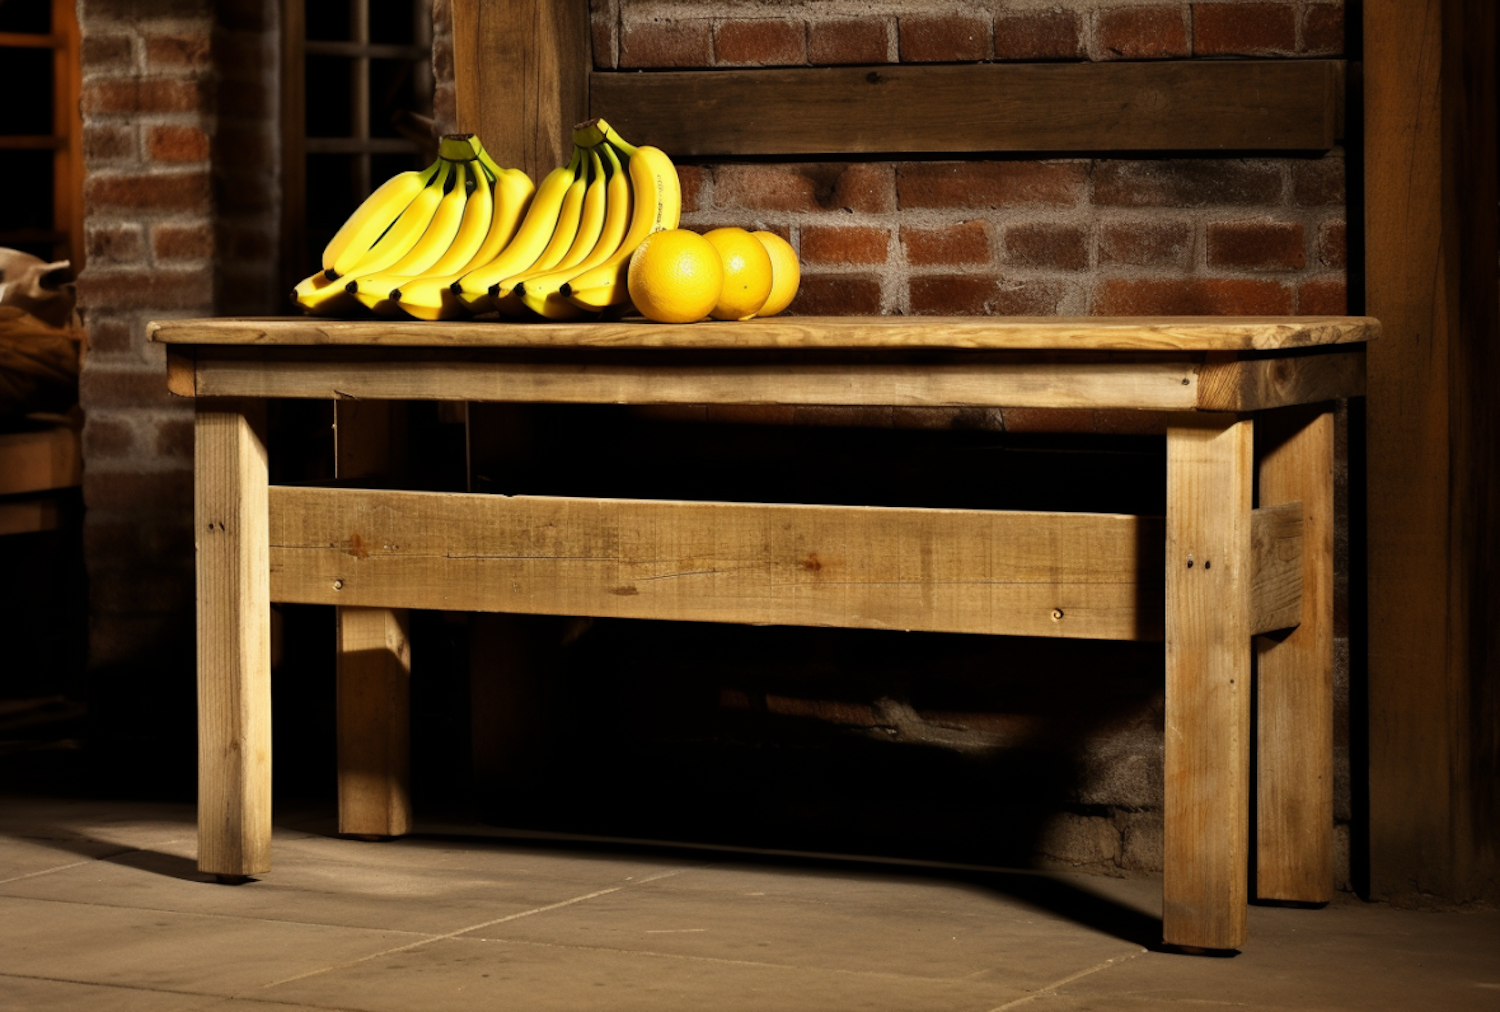 Rustic Fruit Display on Wooden Table